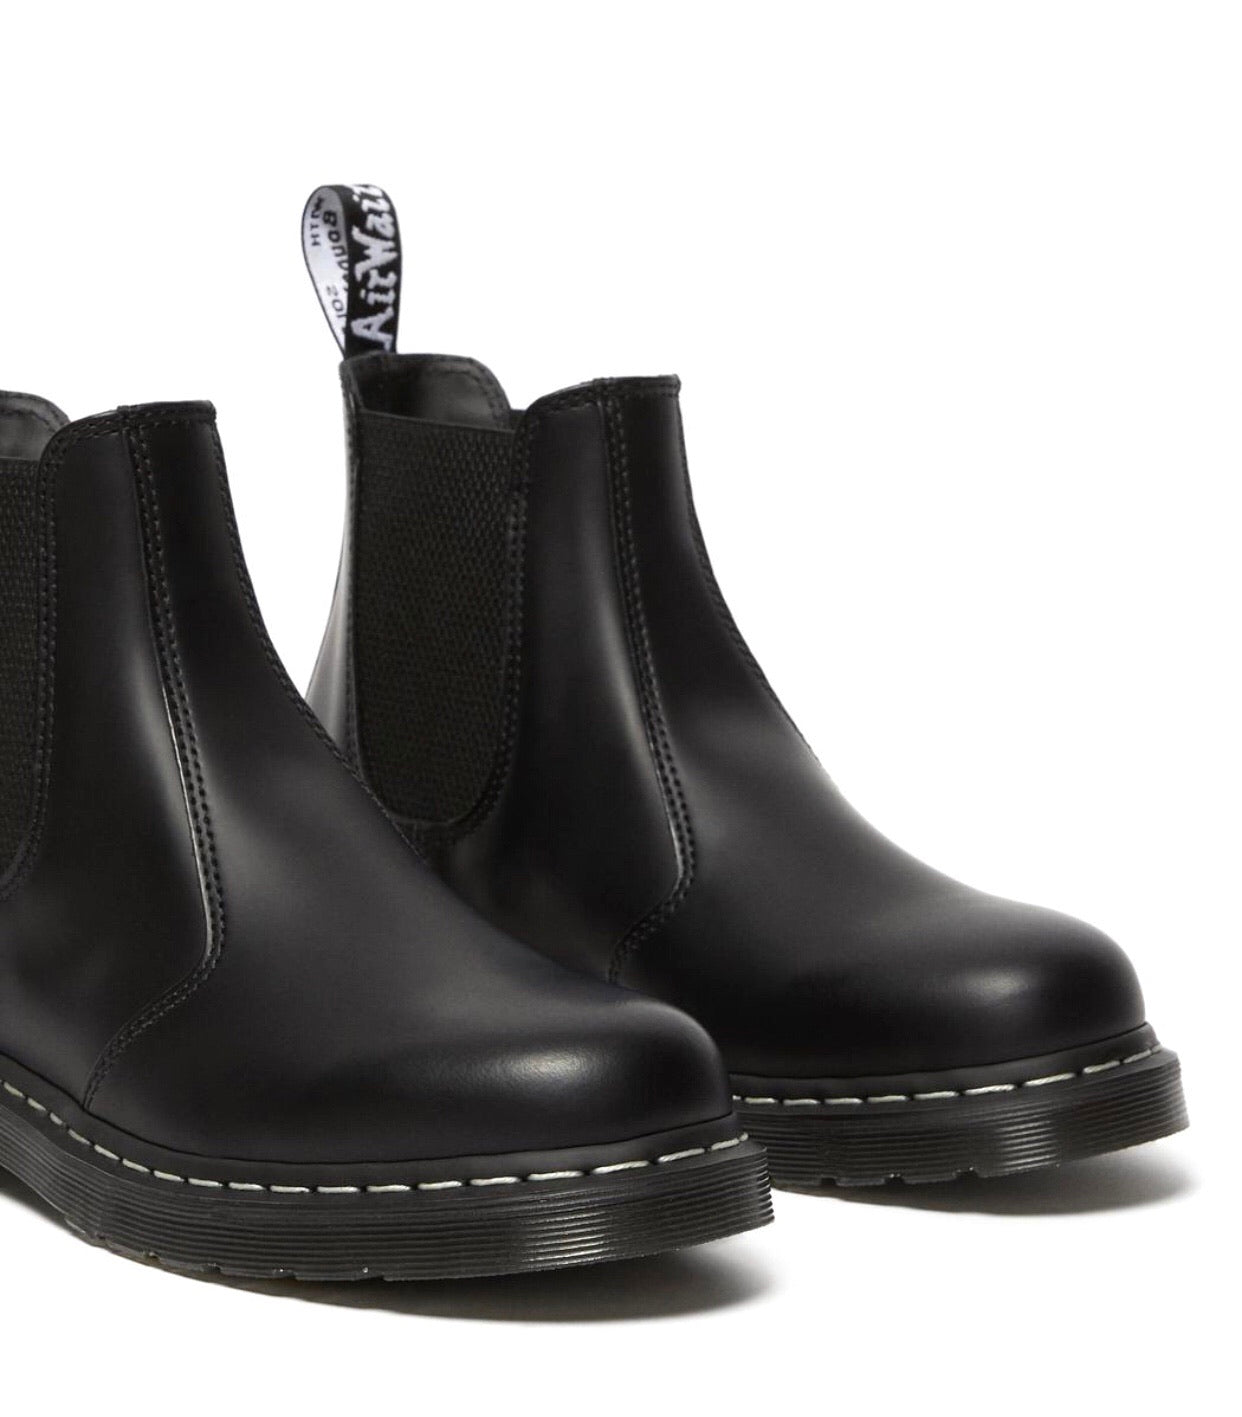 Dr. Martens 2976 Black Smooth White Stitch Chelsea Boot